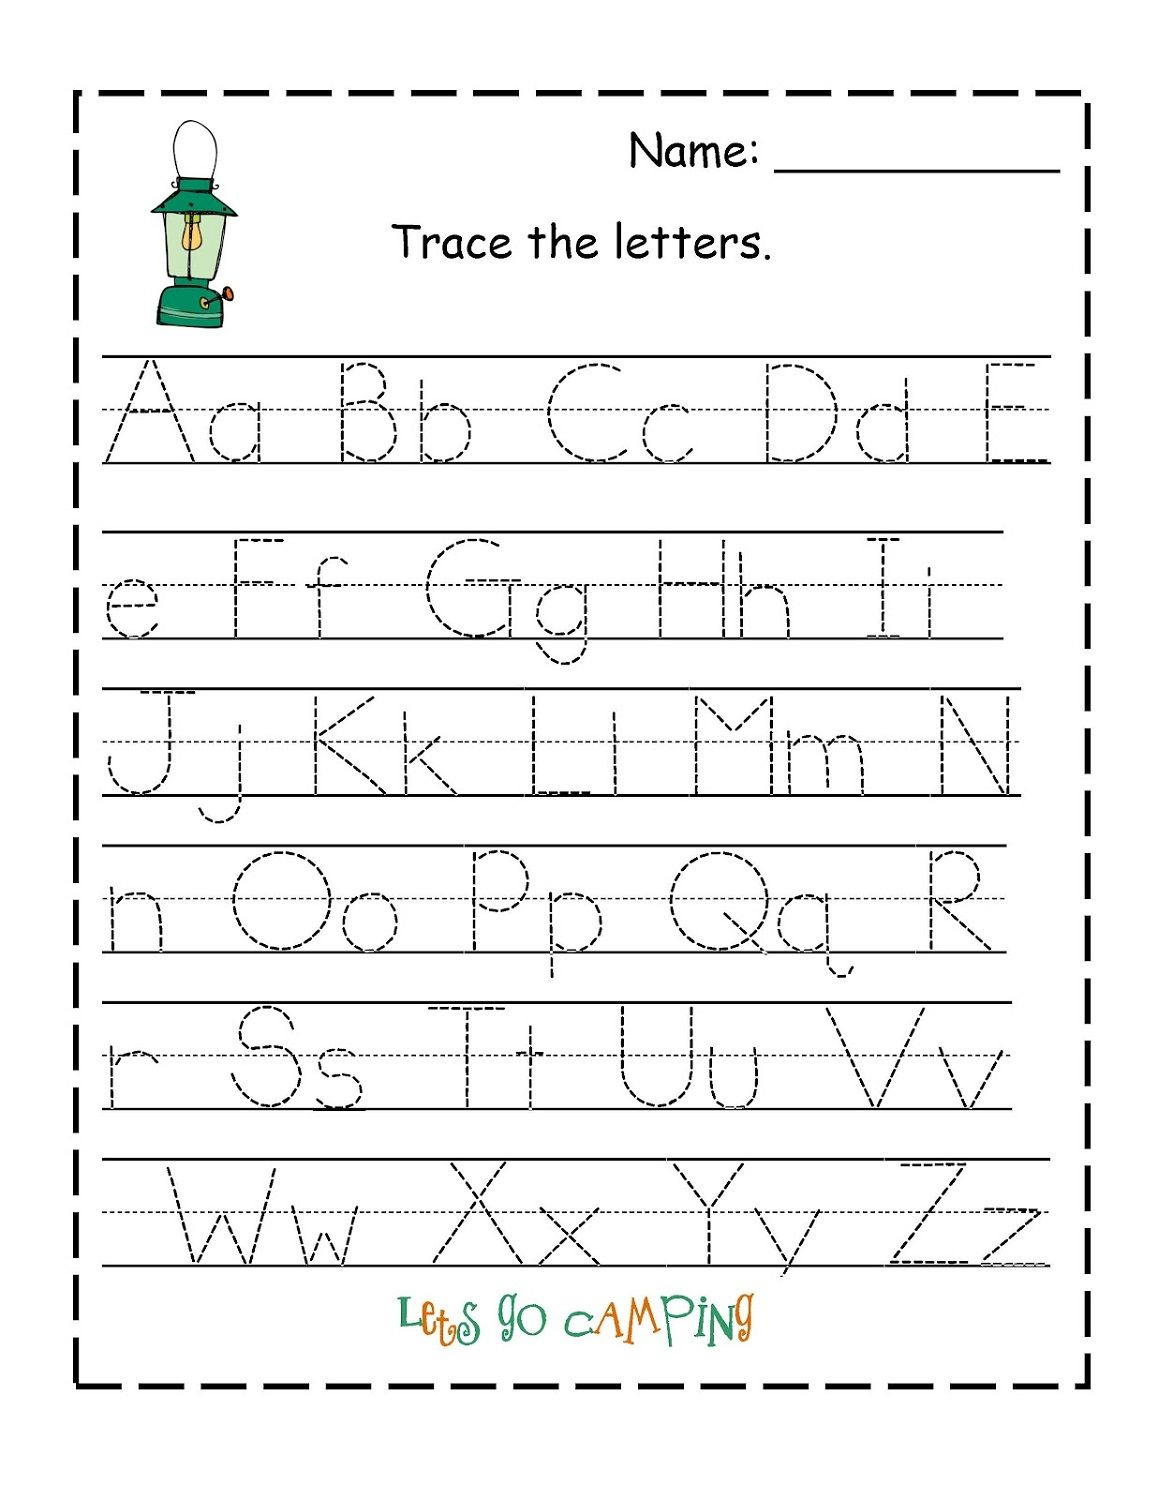 Traceable Alphabet Worksheets A-Z | Alphabet Tracing intended for Letter Tracing Worksheets Pdf A-Z